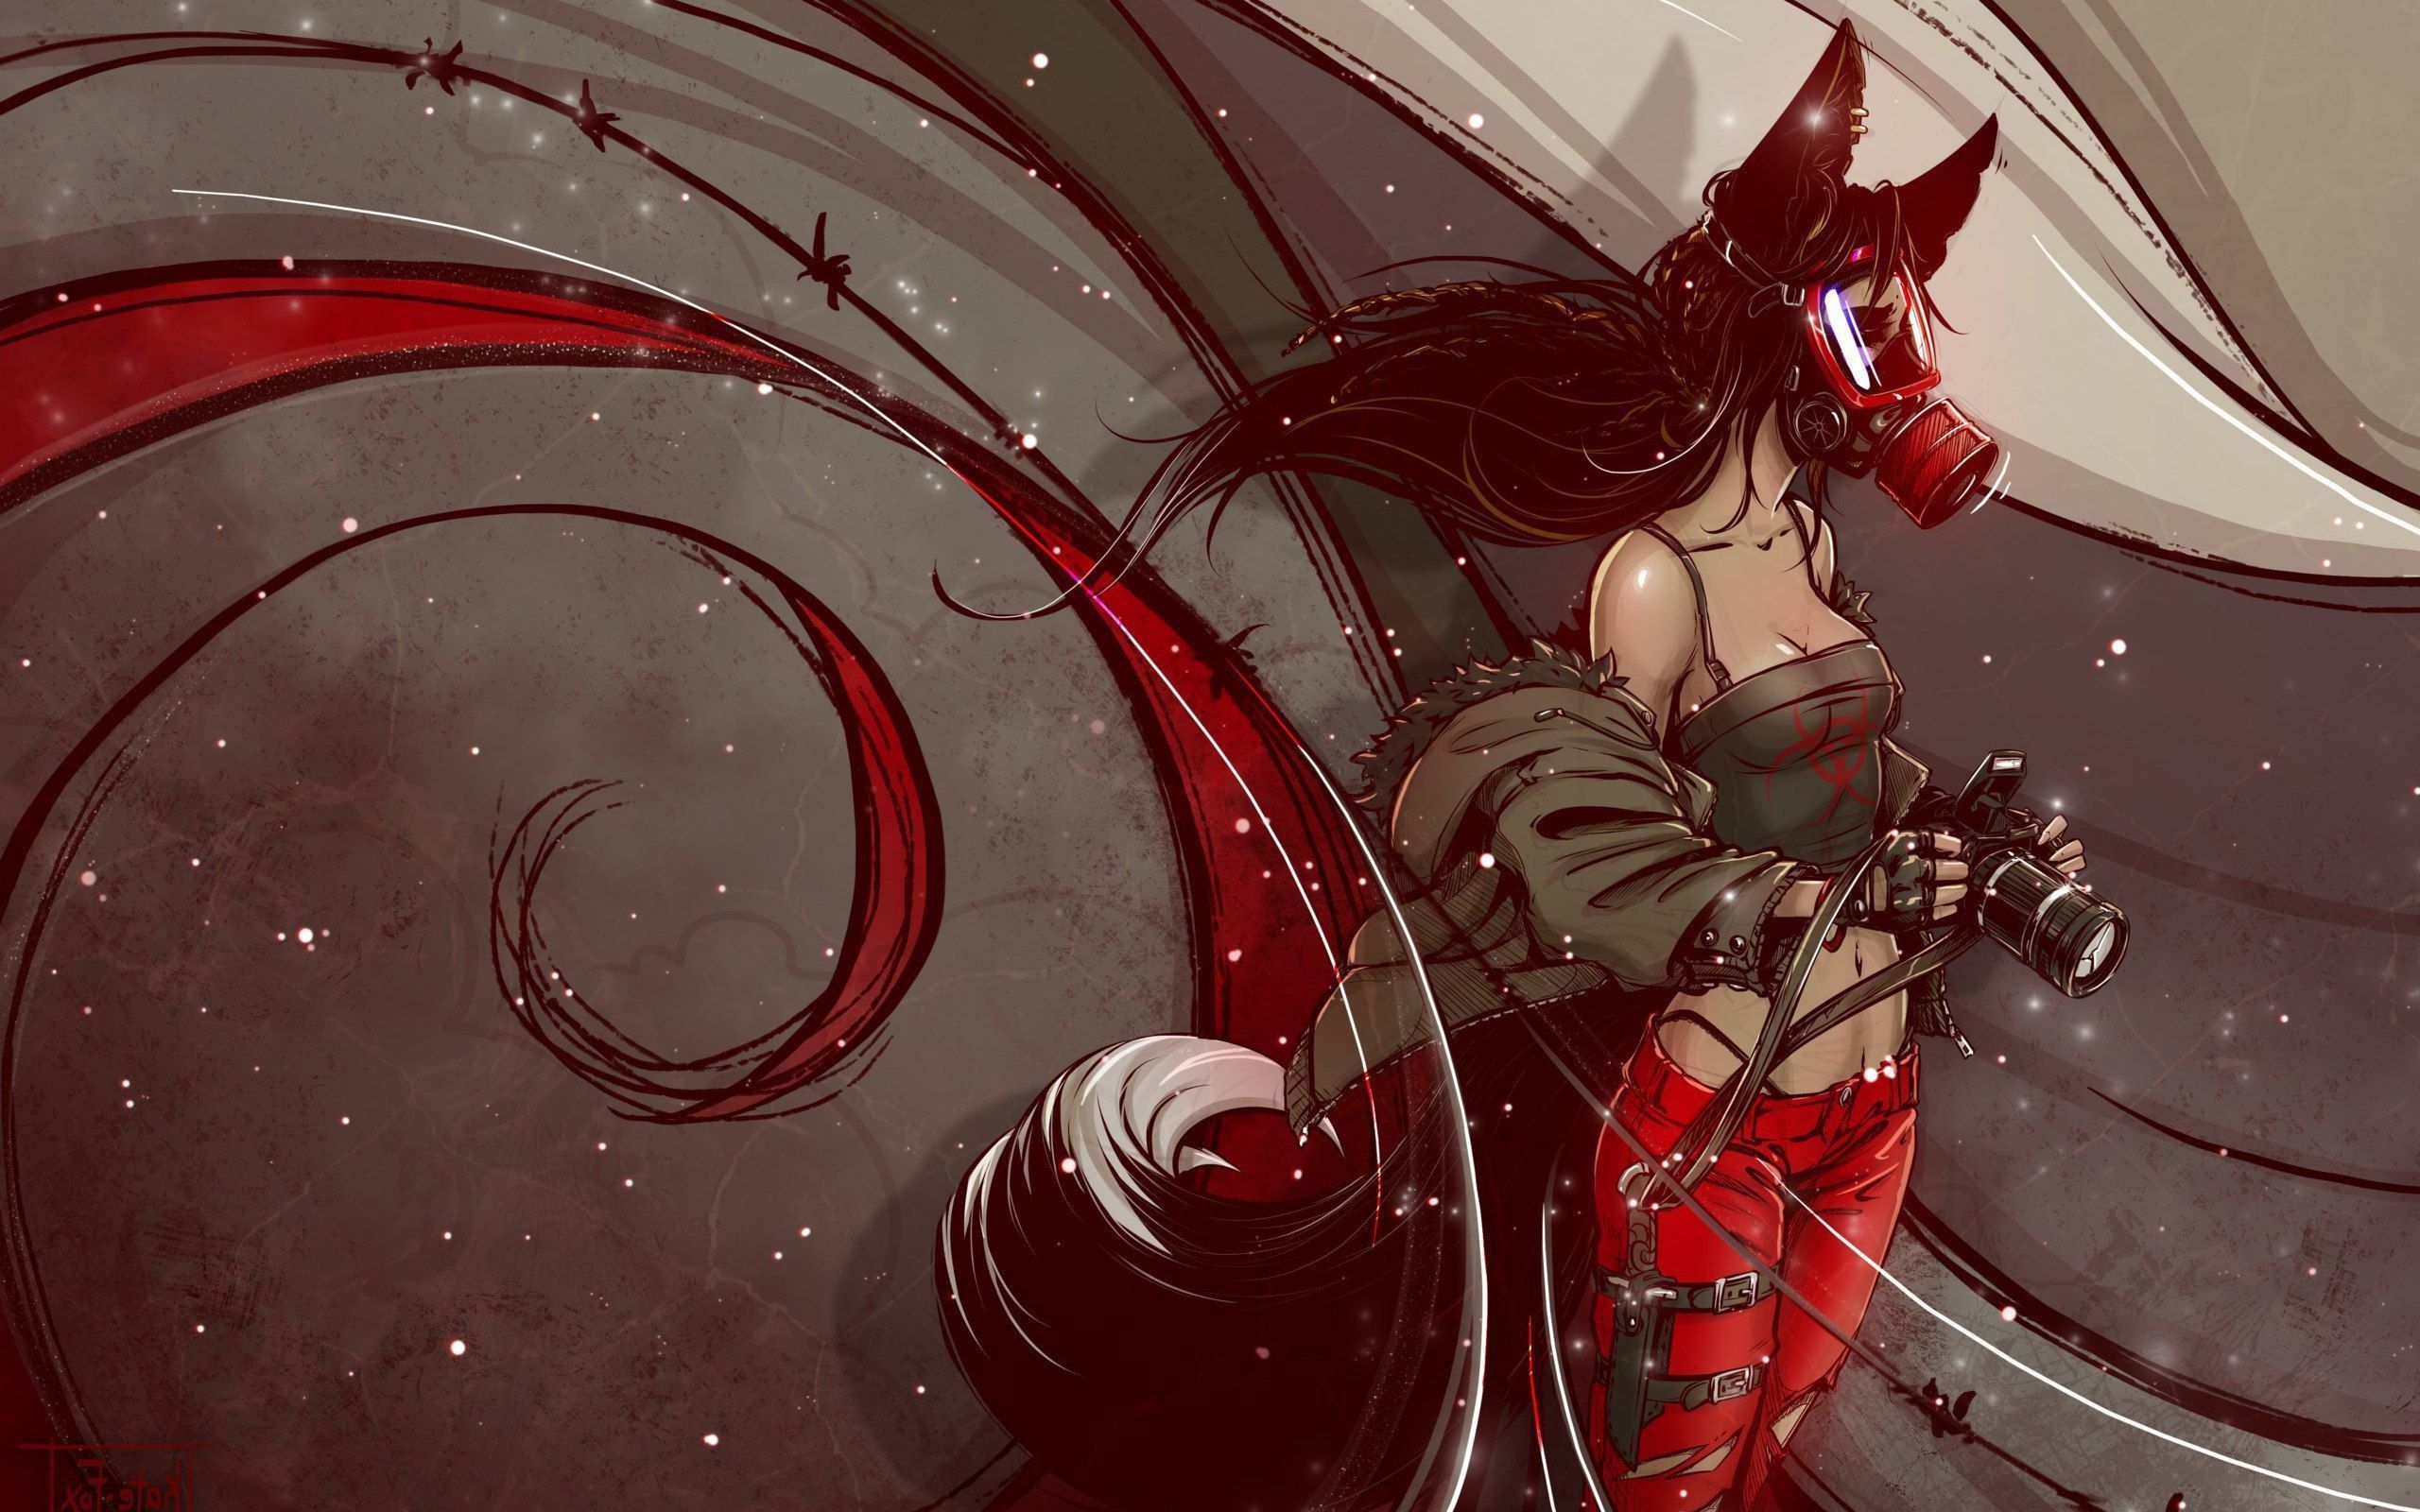 Download 2560x1600 Fox girl with a mask wallpaper